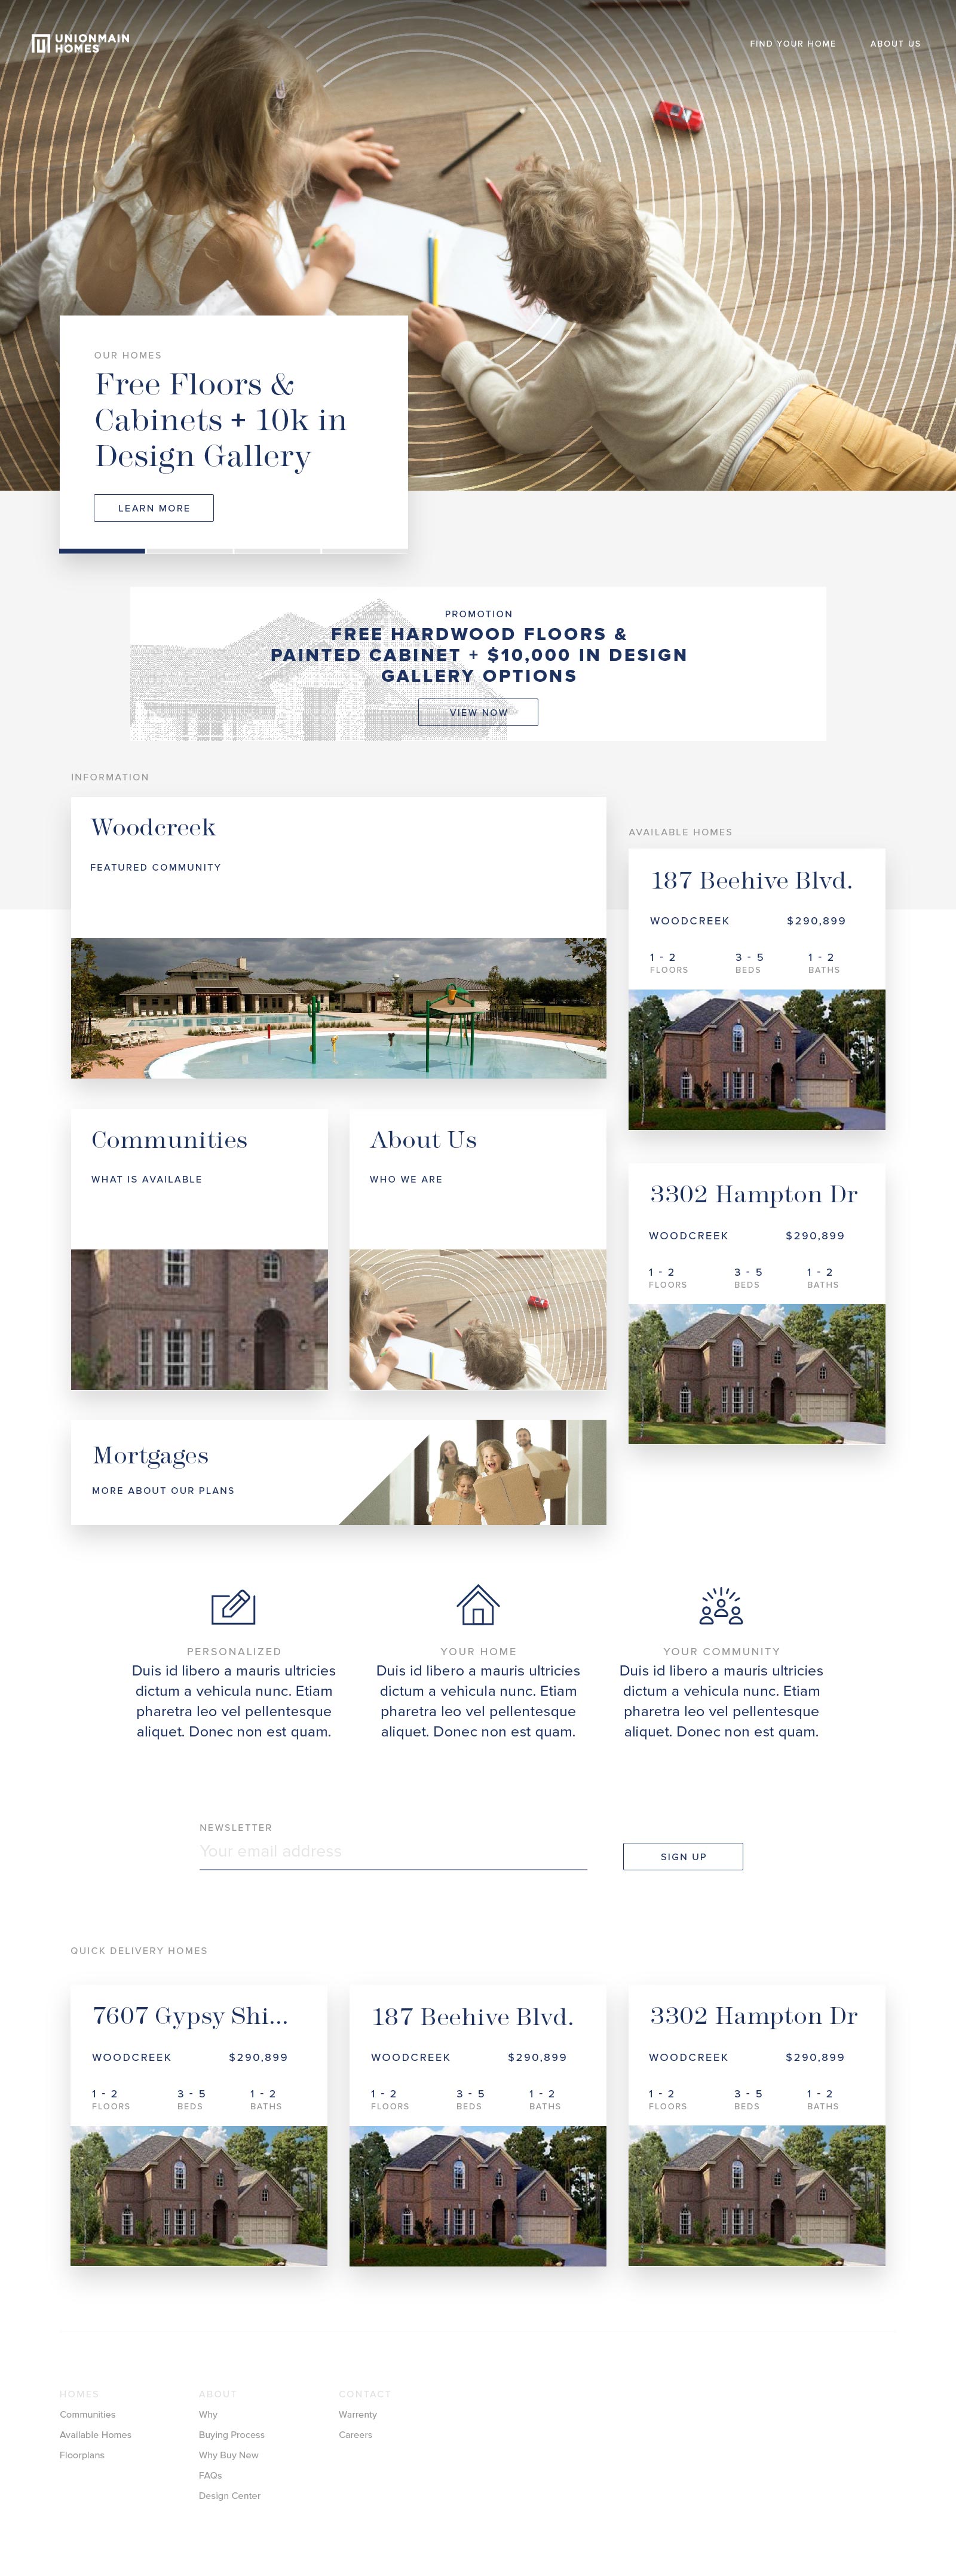 image of union main homes website